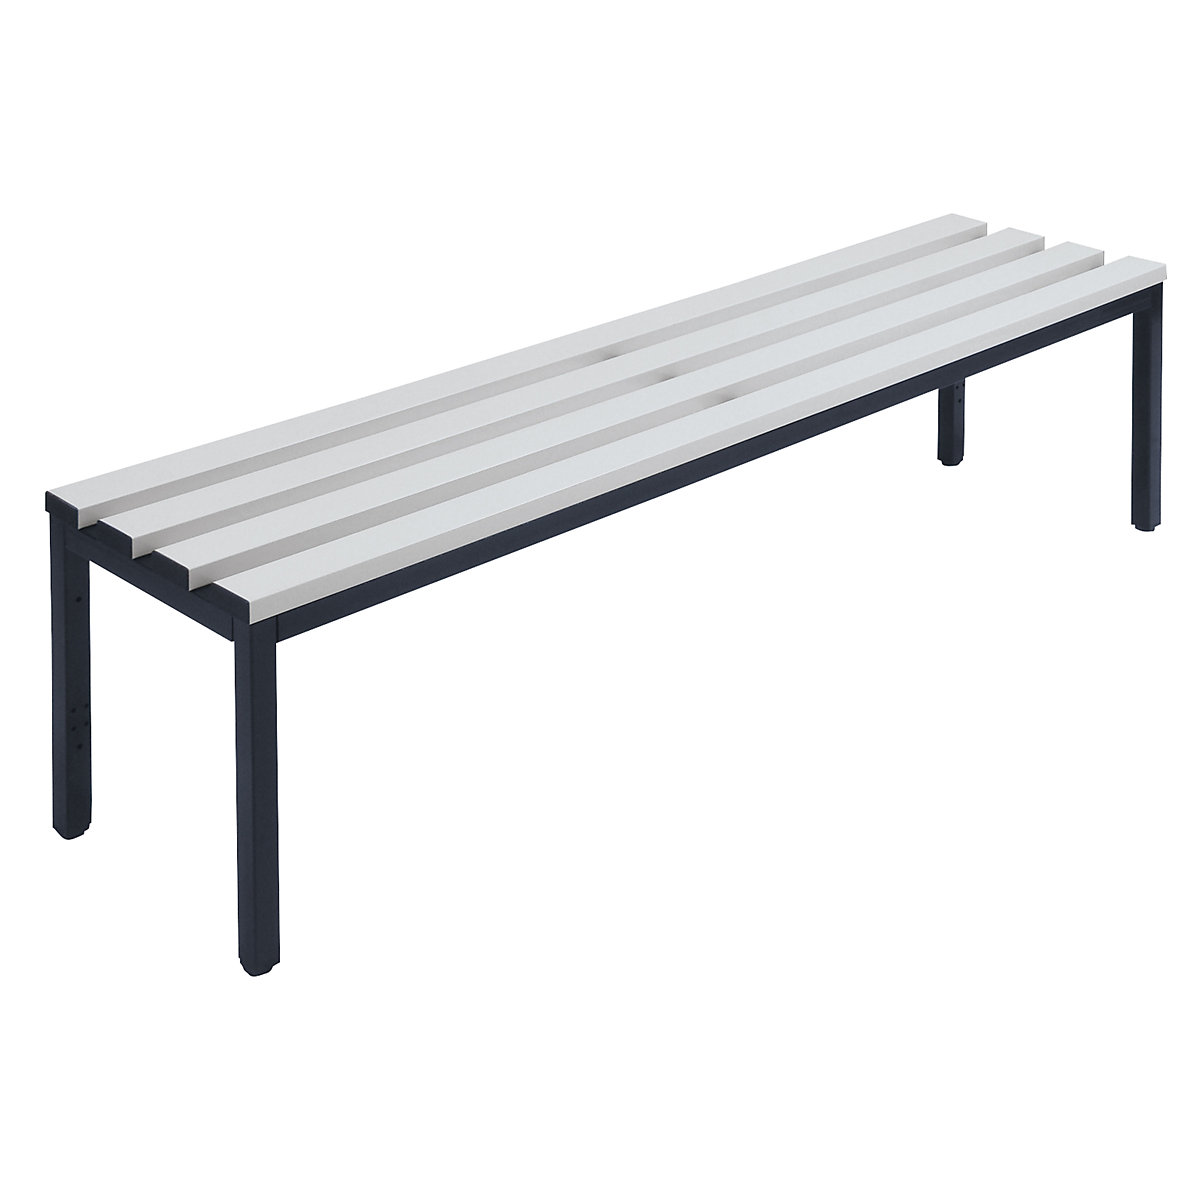 Wolf – Cloakroom bench without back rest, PVC slats, grey, length 1500 mm